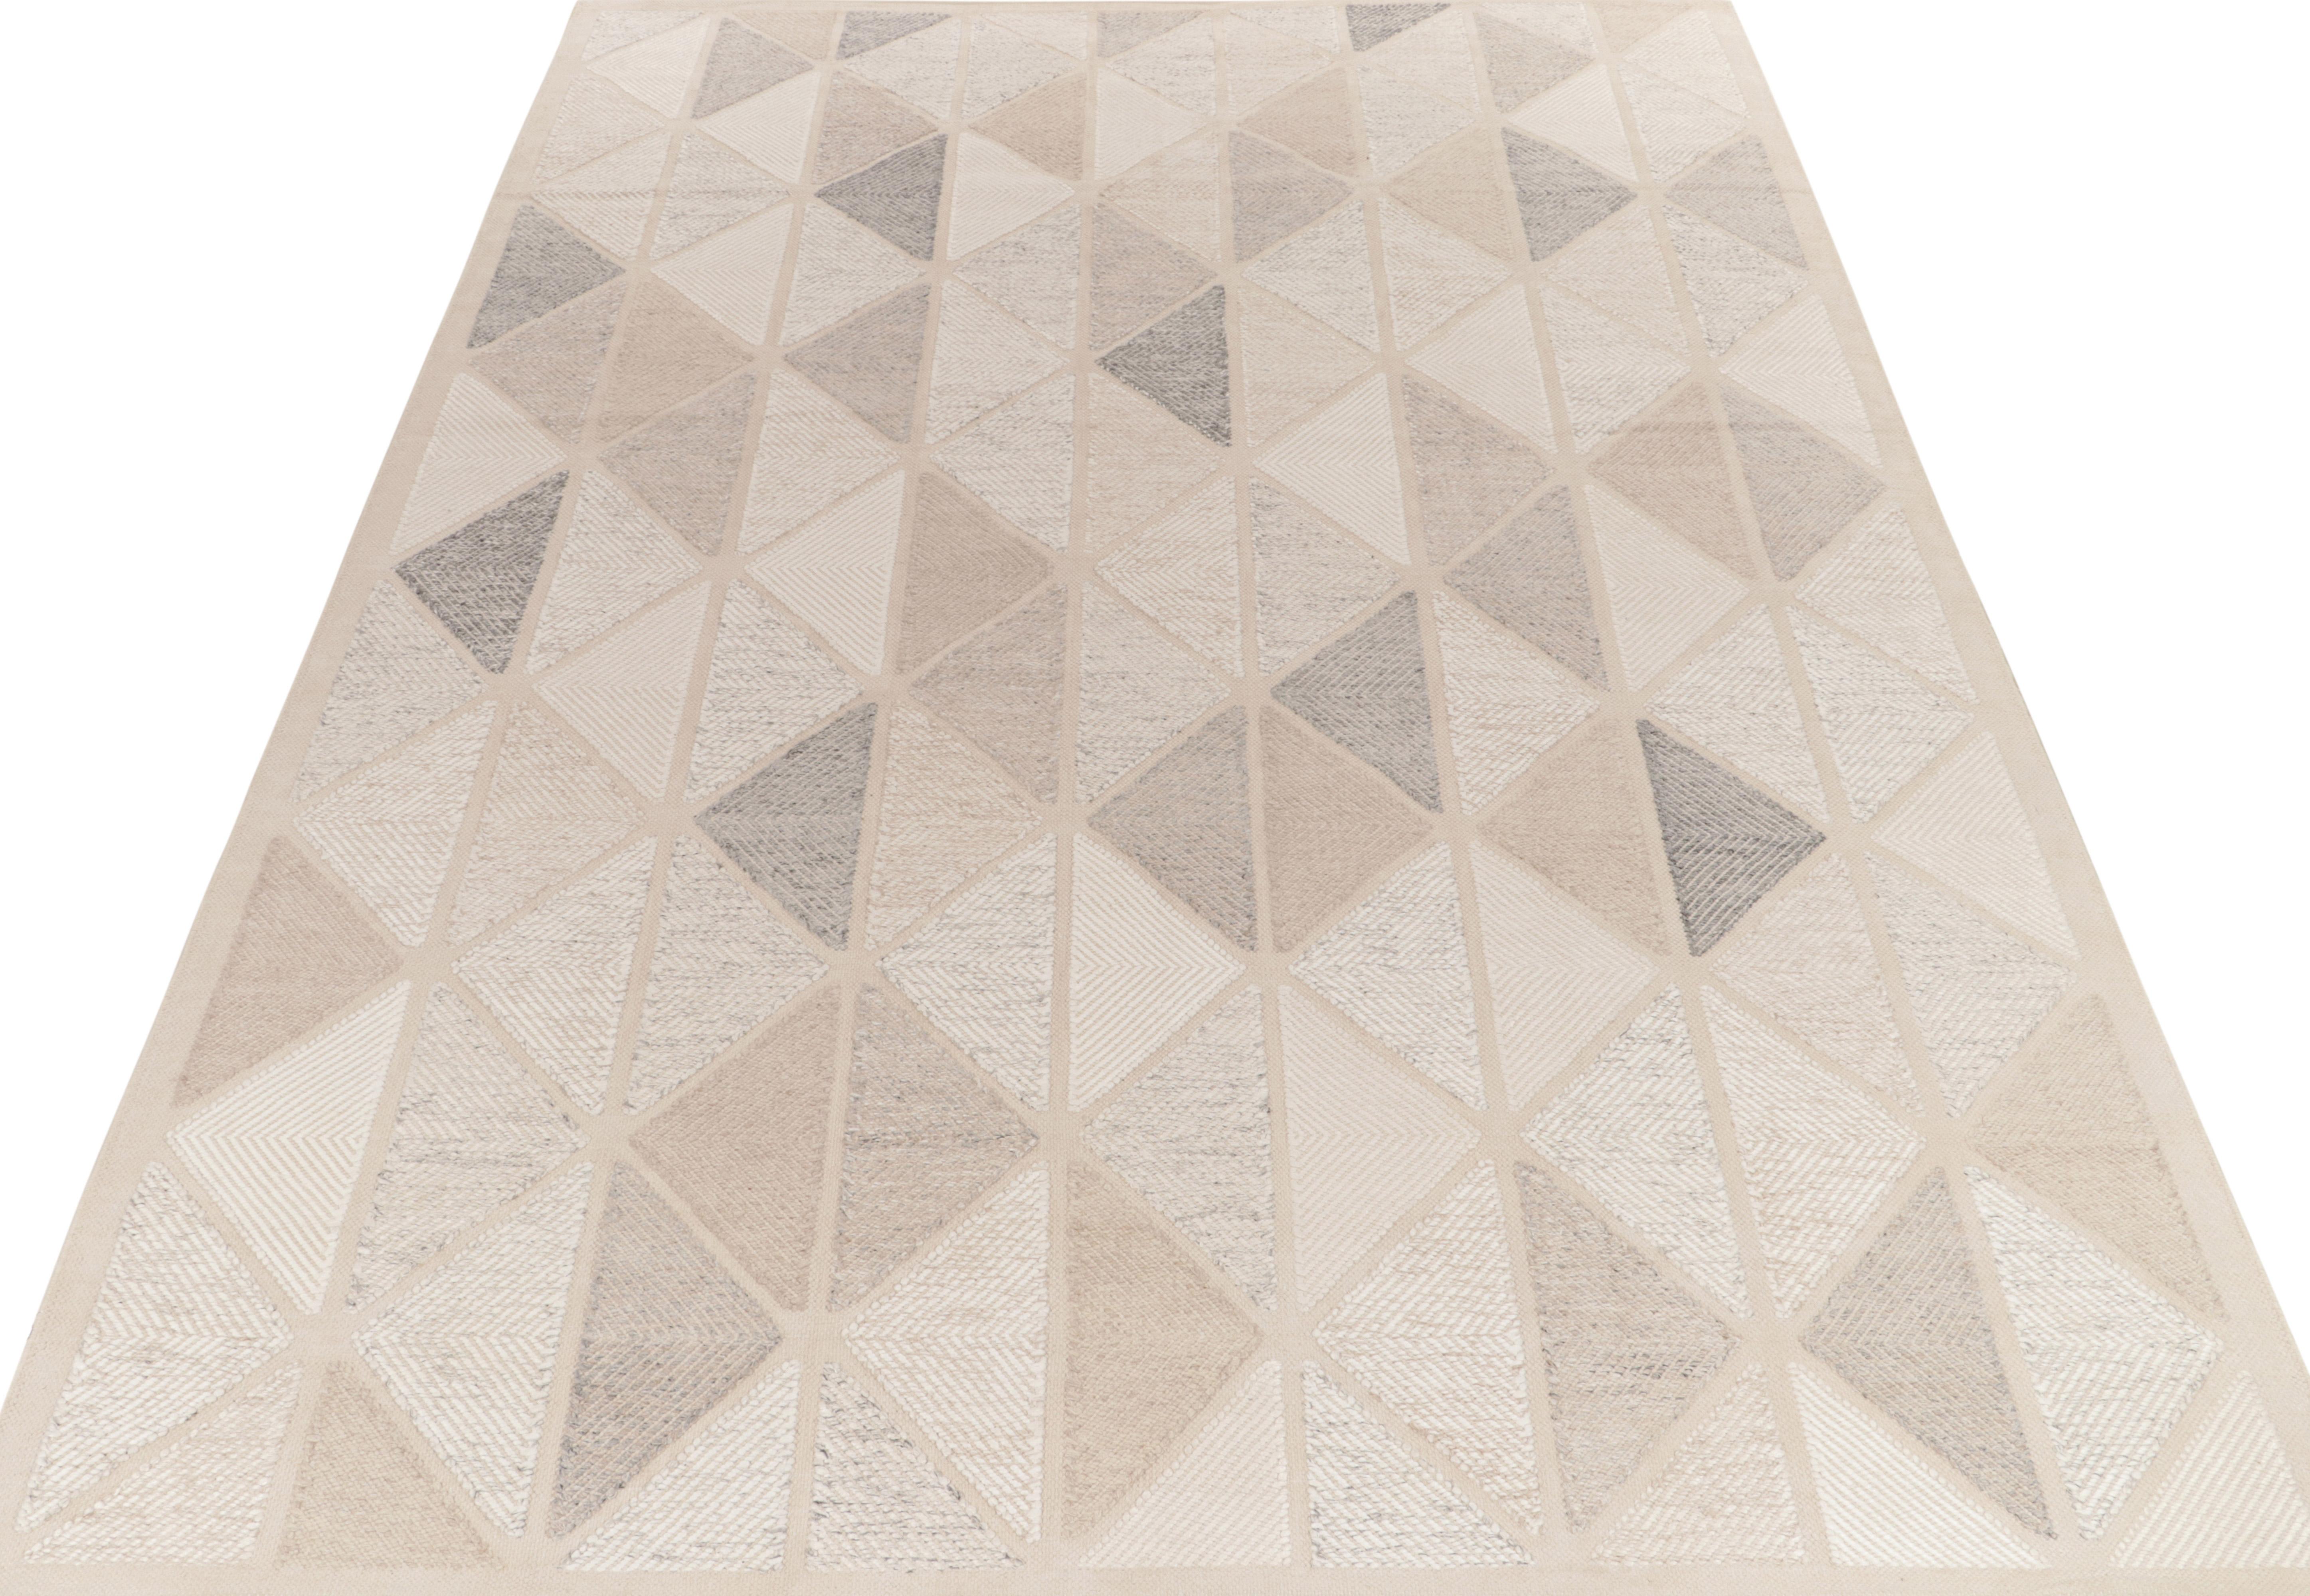 Rug & Kilim presents this exquisite 10x14 Scandinavian kilim from the Morocco line of the award-winning flat weave texture. The handwoven piece flows in an all over half diamond pattern in a delightful blend of beige, stone blue, gray & white. The